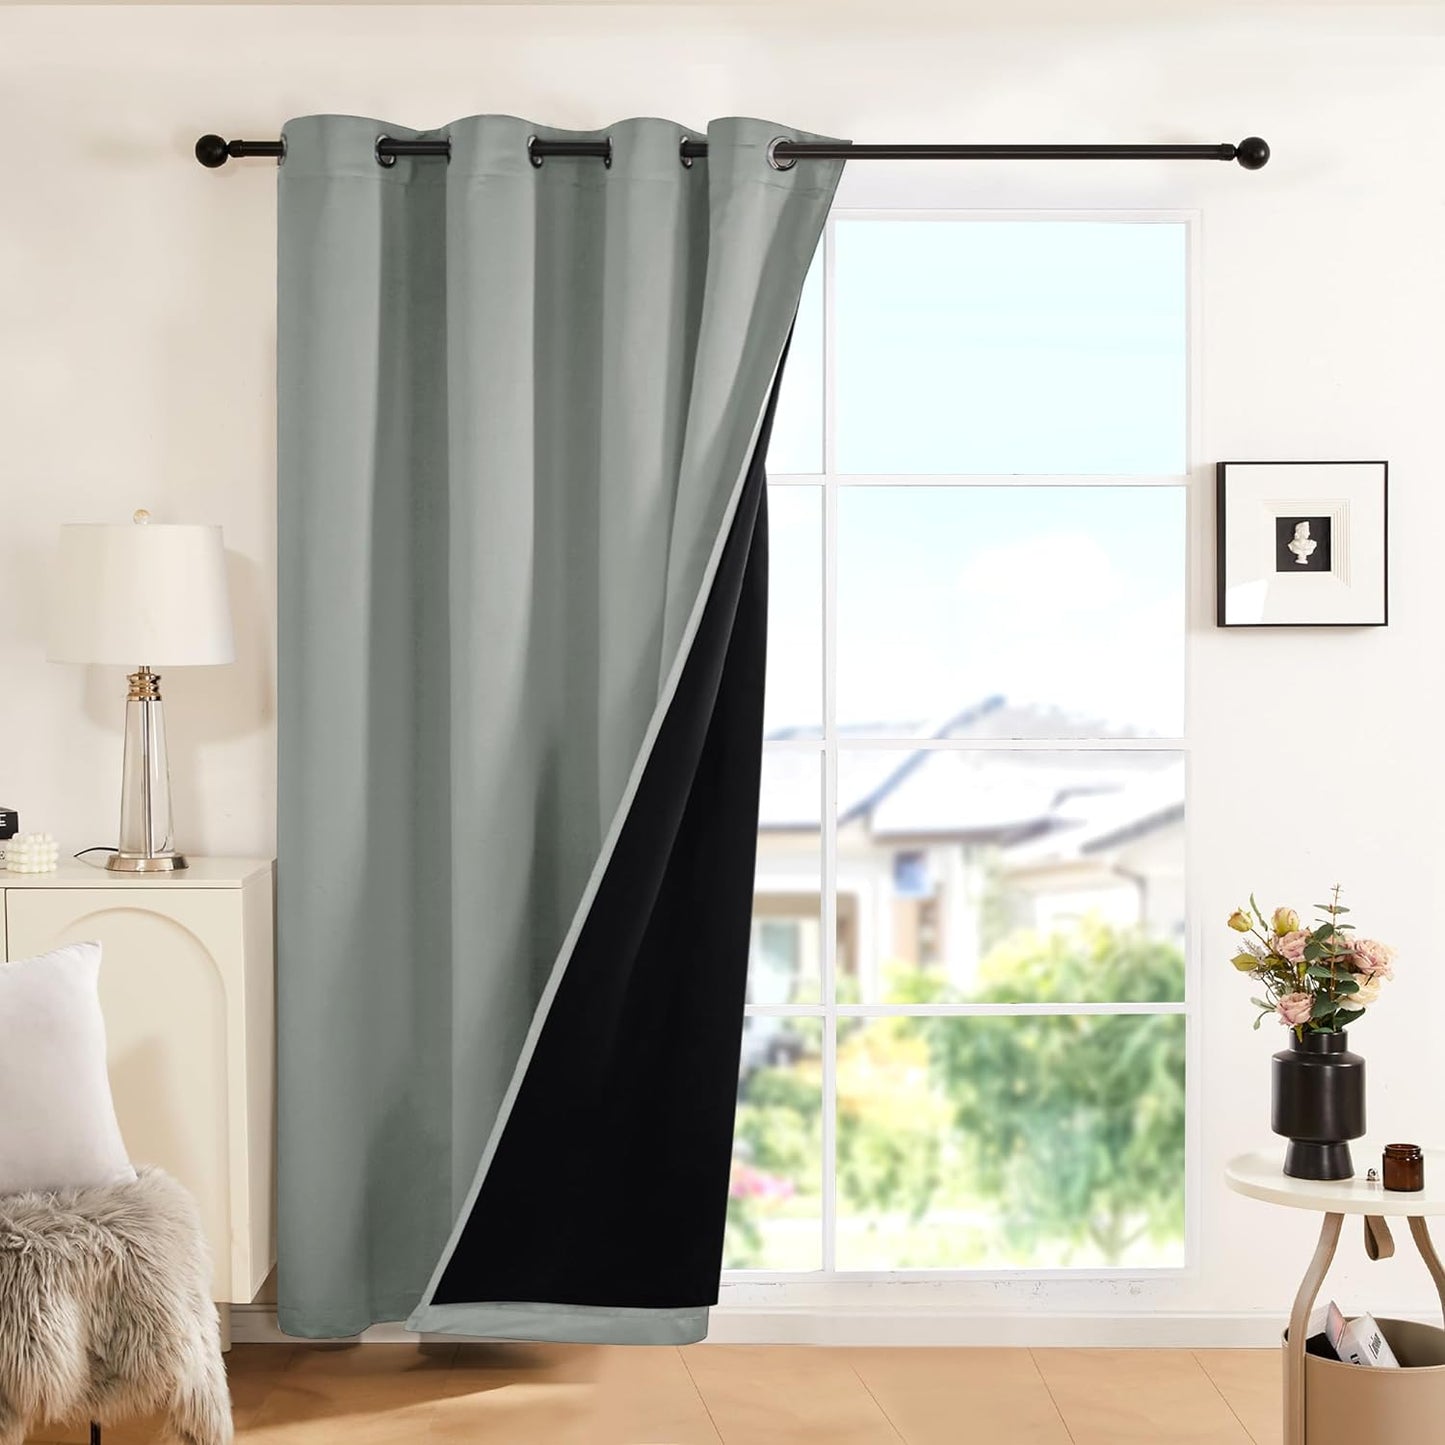 Deconovo Blackout Curtains 72 Inch Length - Grommet Curtains, Thermal Insulated Curtains, Energy Saving Panels for Home Decor (Grey, 1 Panel, 52W X 72L Inch)  DECONOVO   